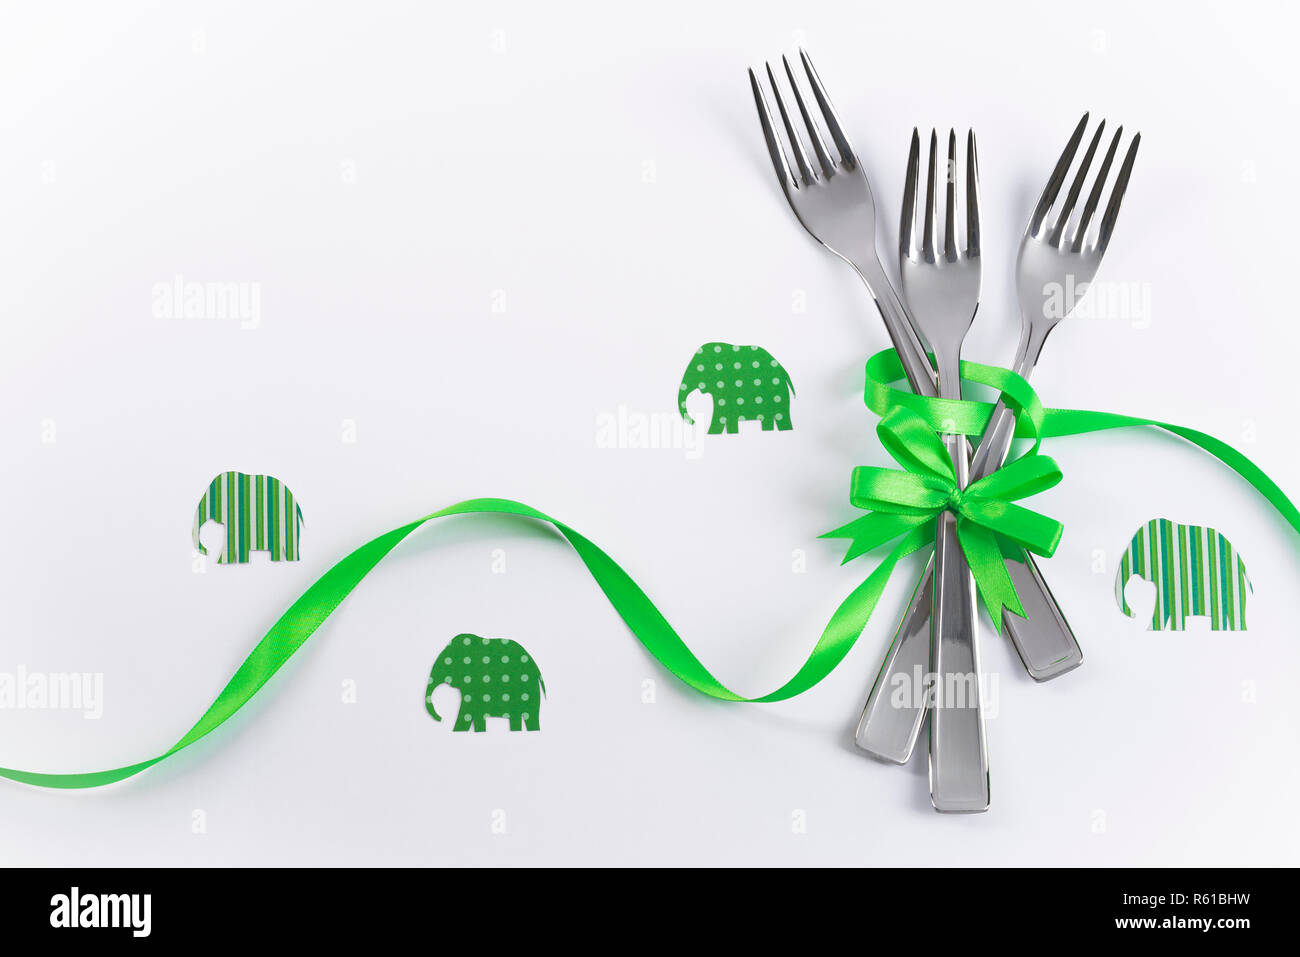 Silverware on white with green ribbon as background for menu and invitation Stock Photo